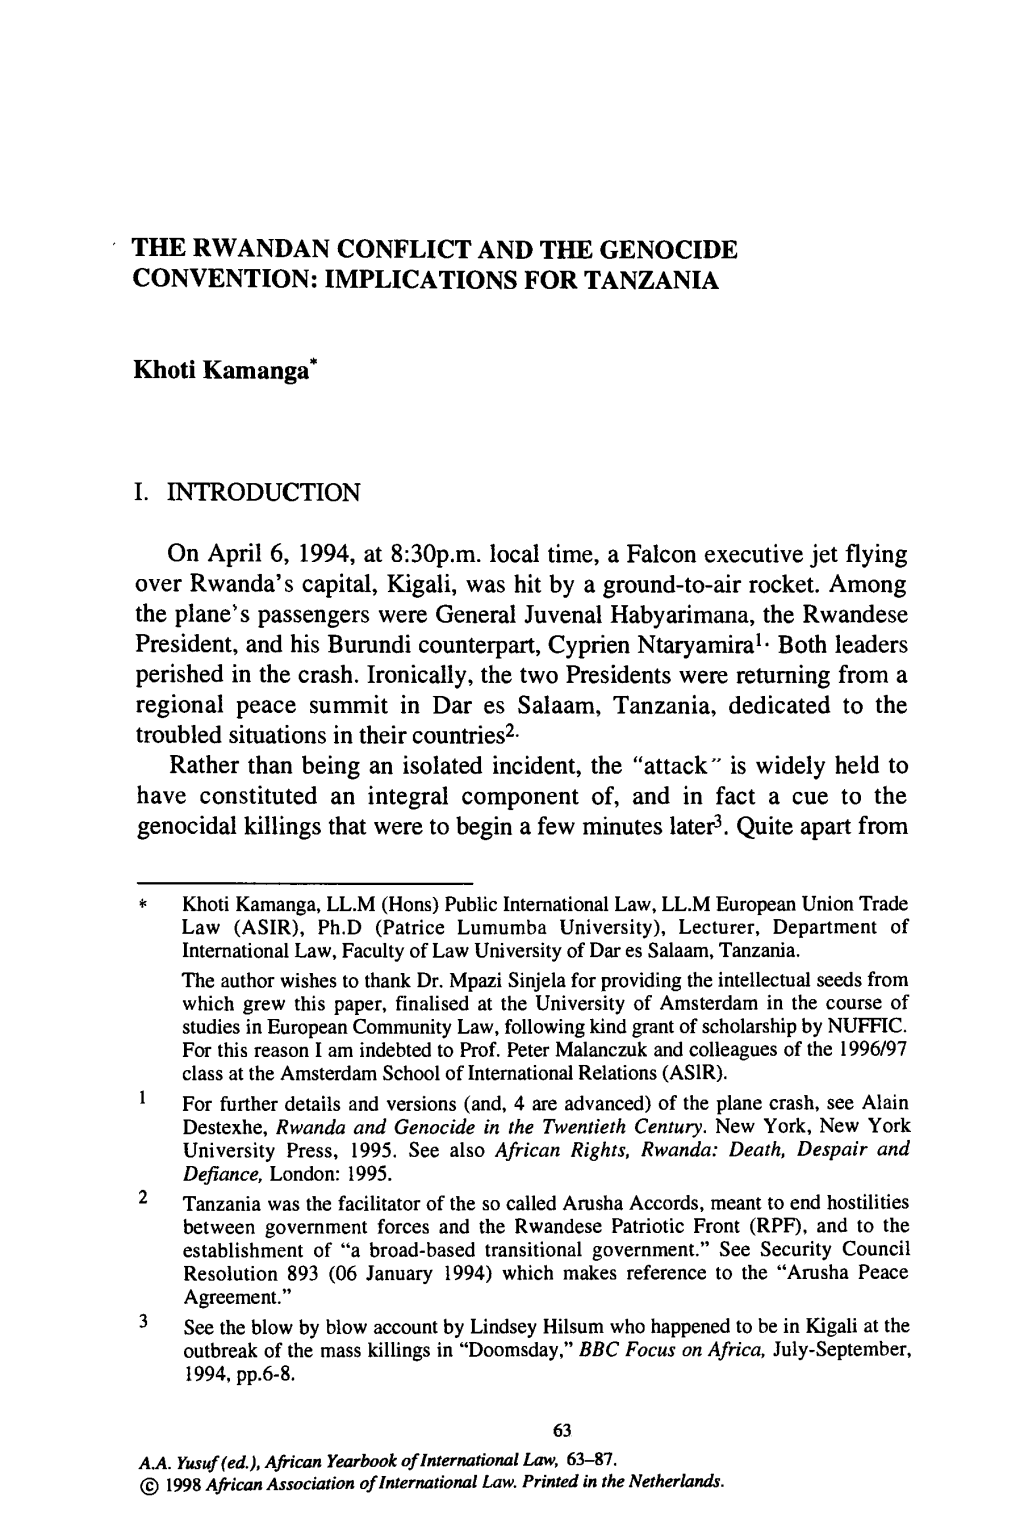 The Rwandan Conflict and the Genocide Convention: Implications for Tanzania